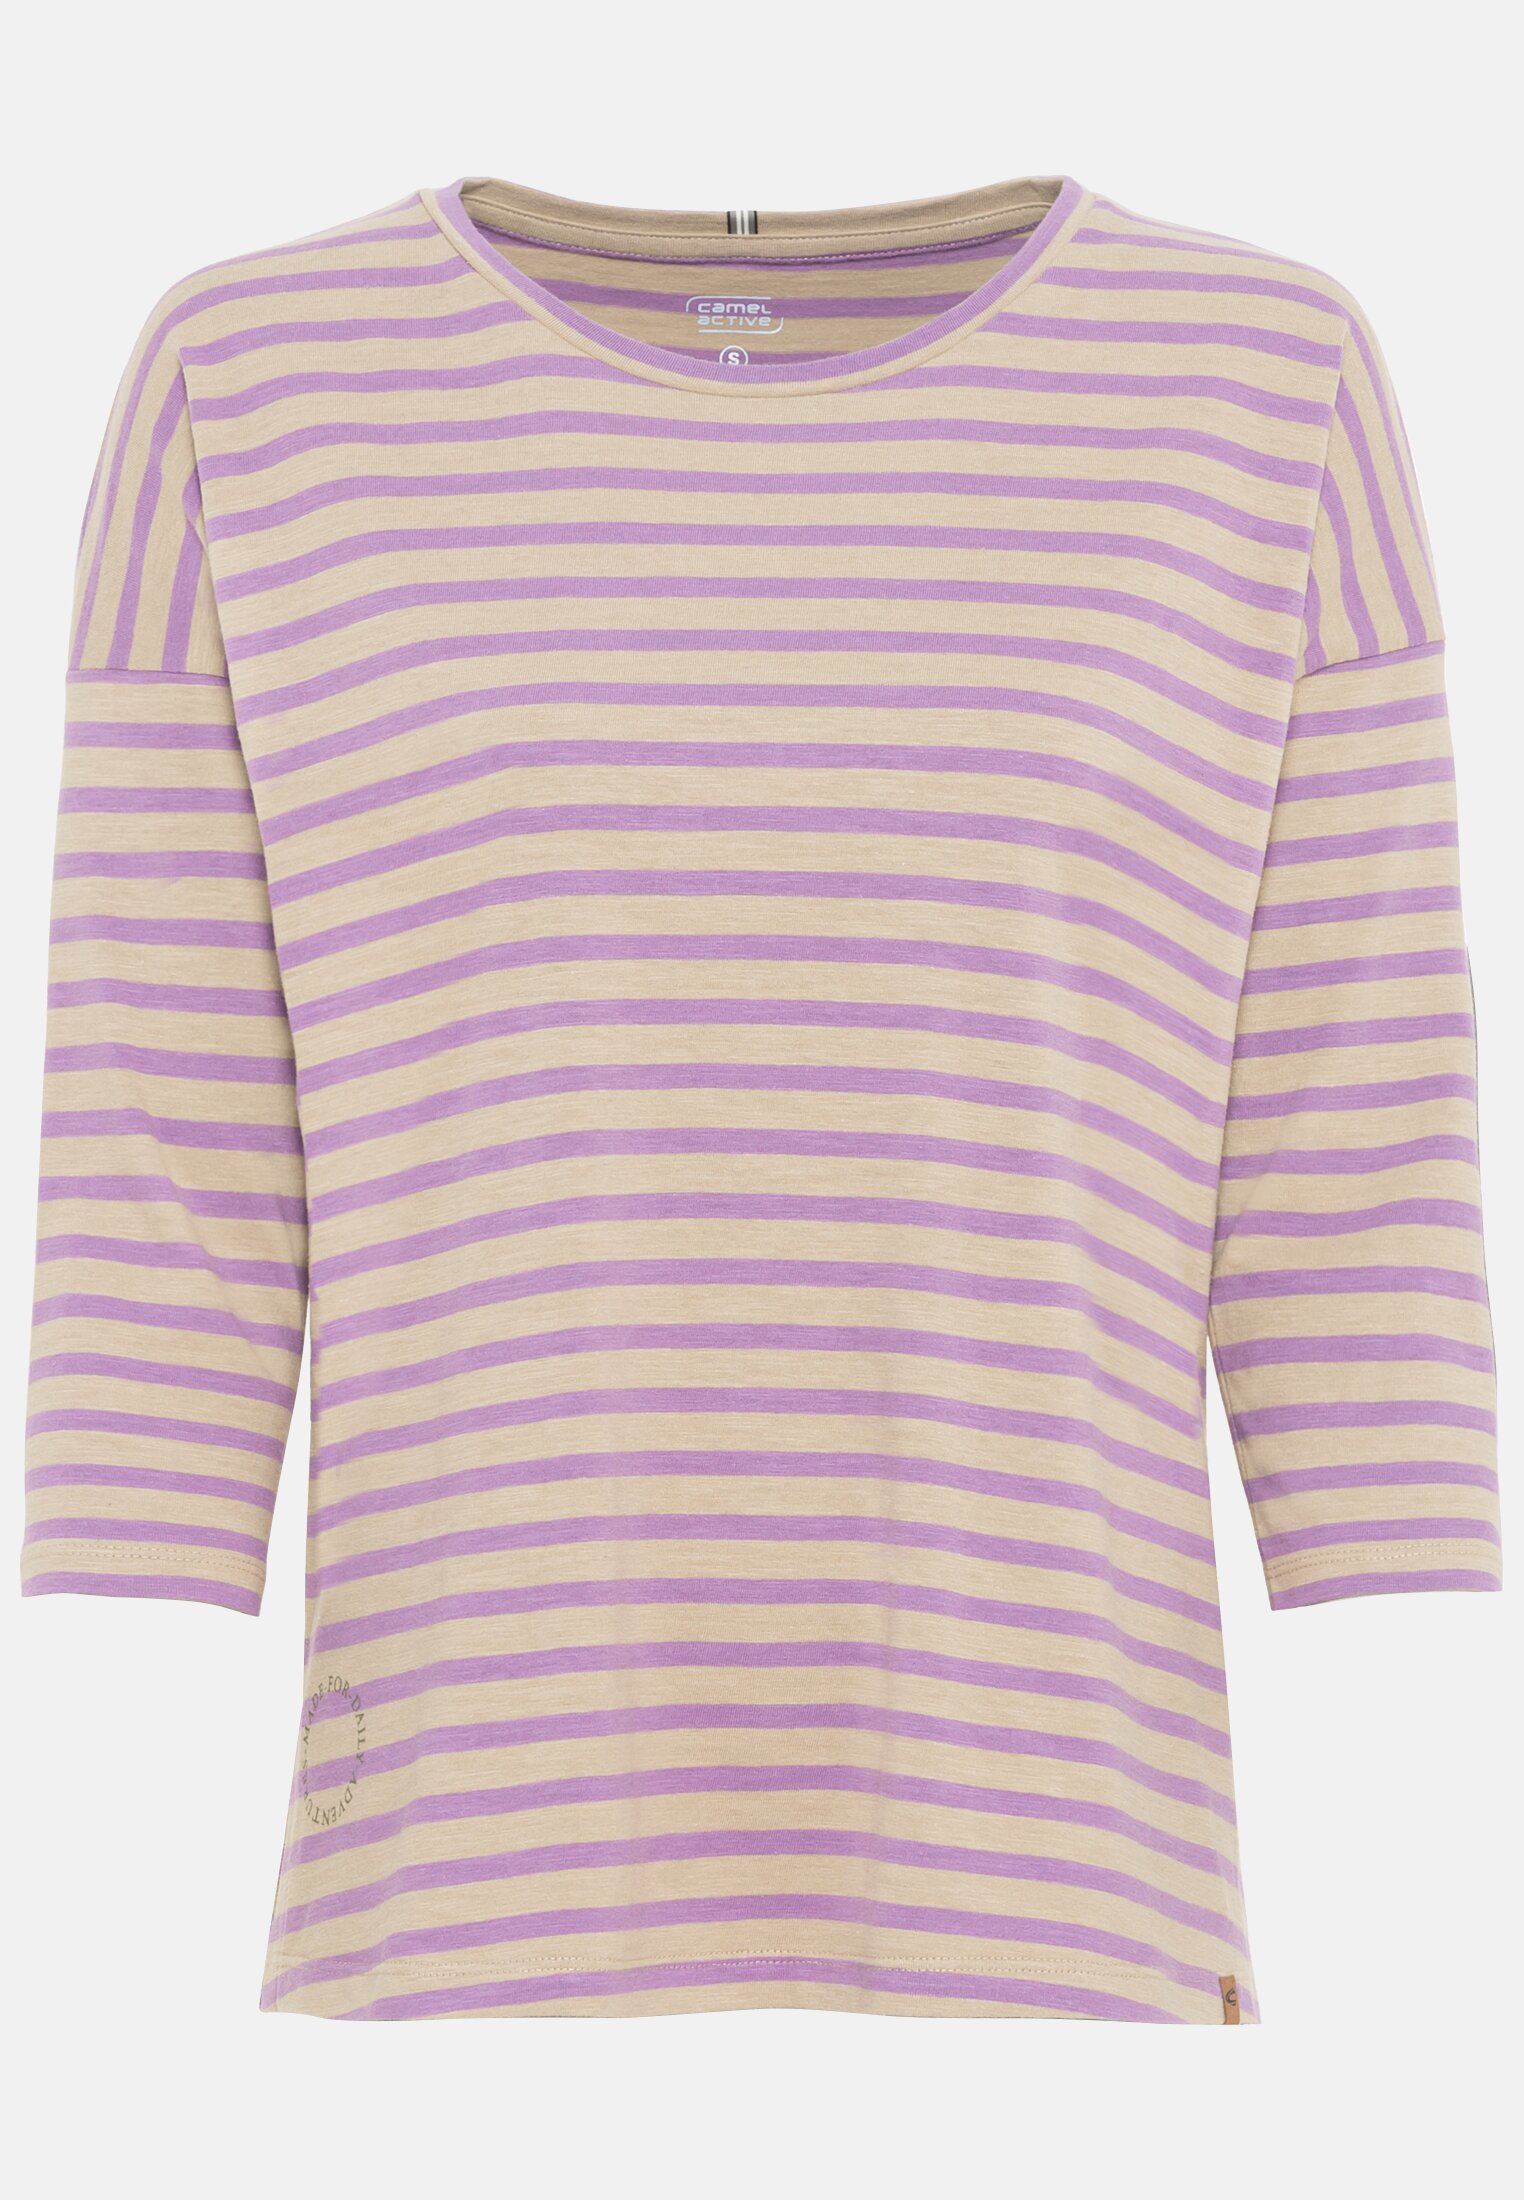 Camel Active Striped Shirt made from organic cotton